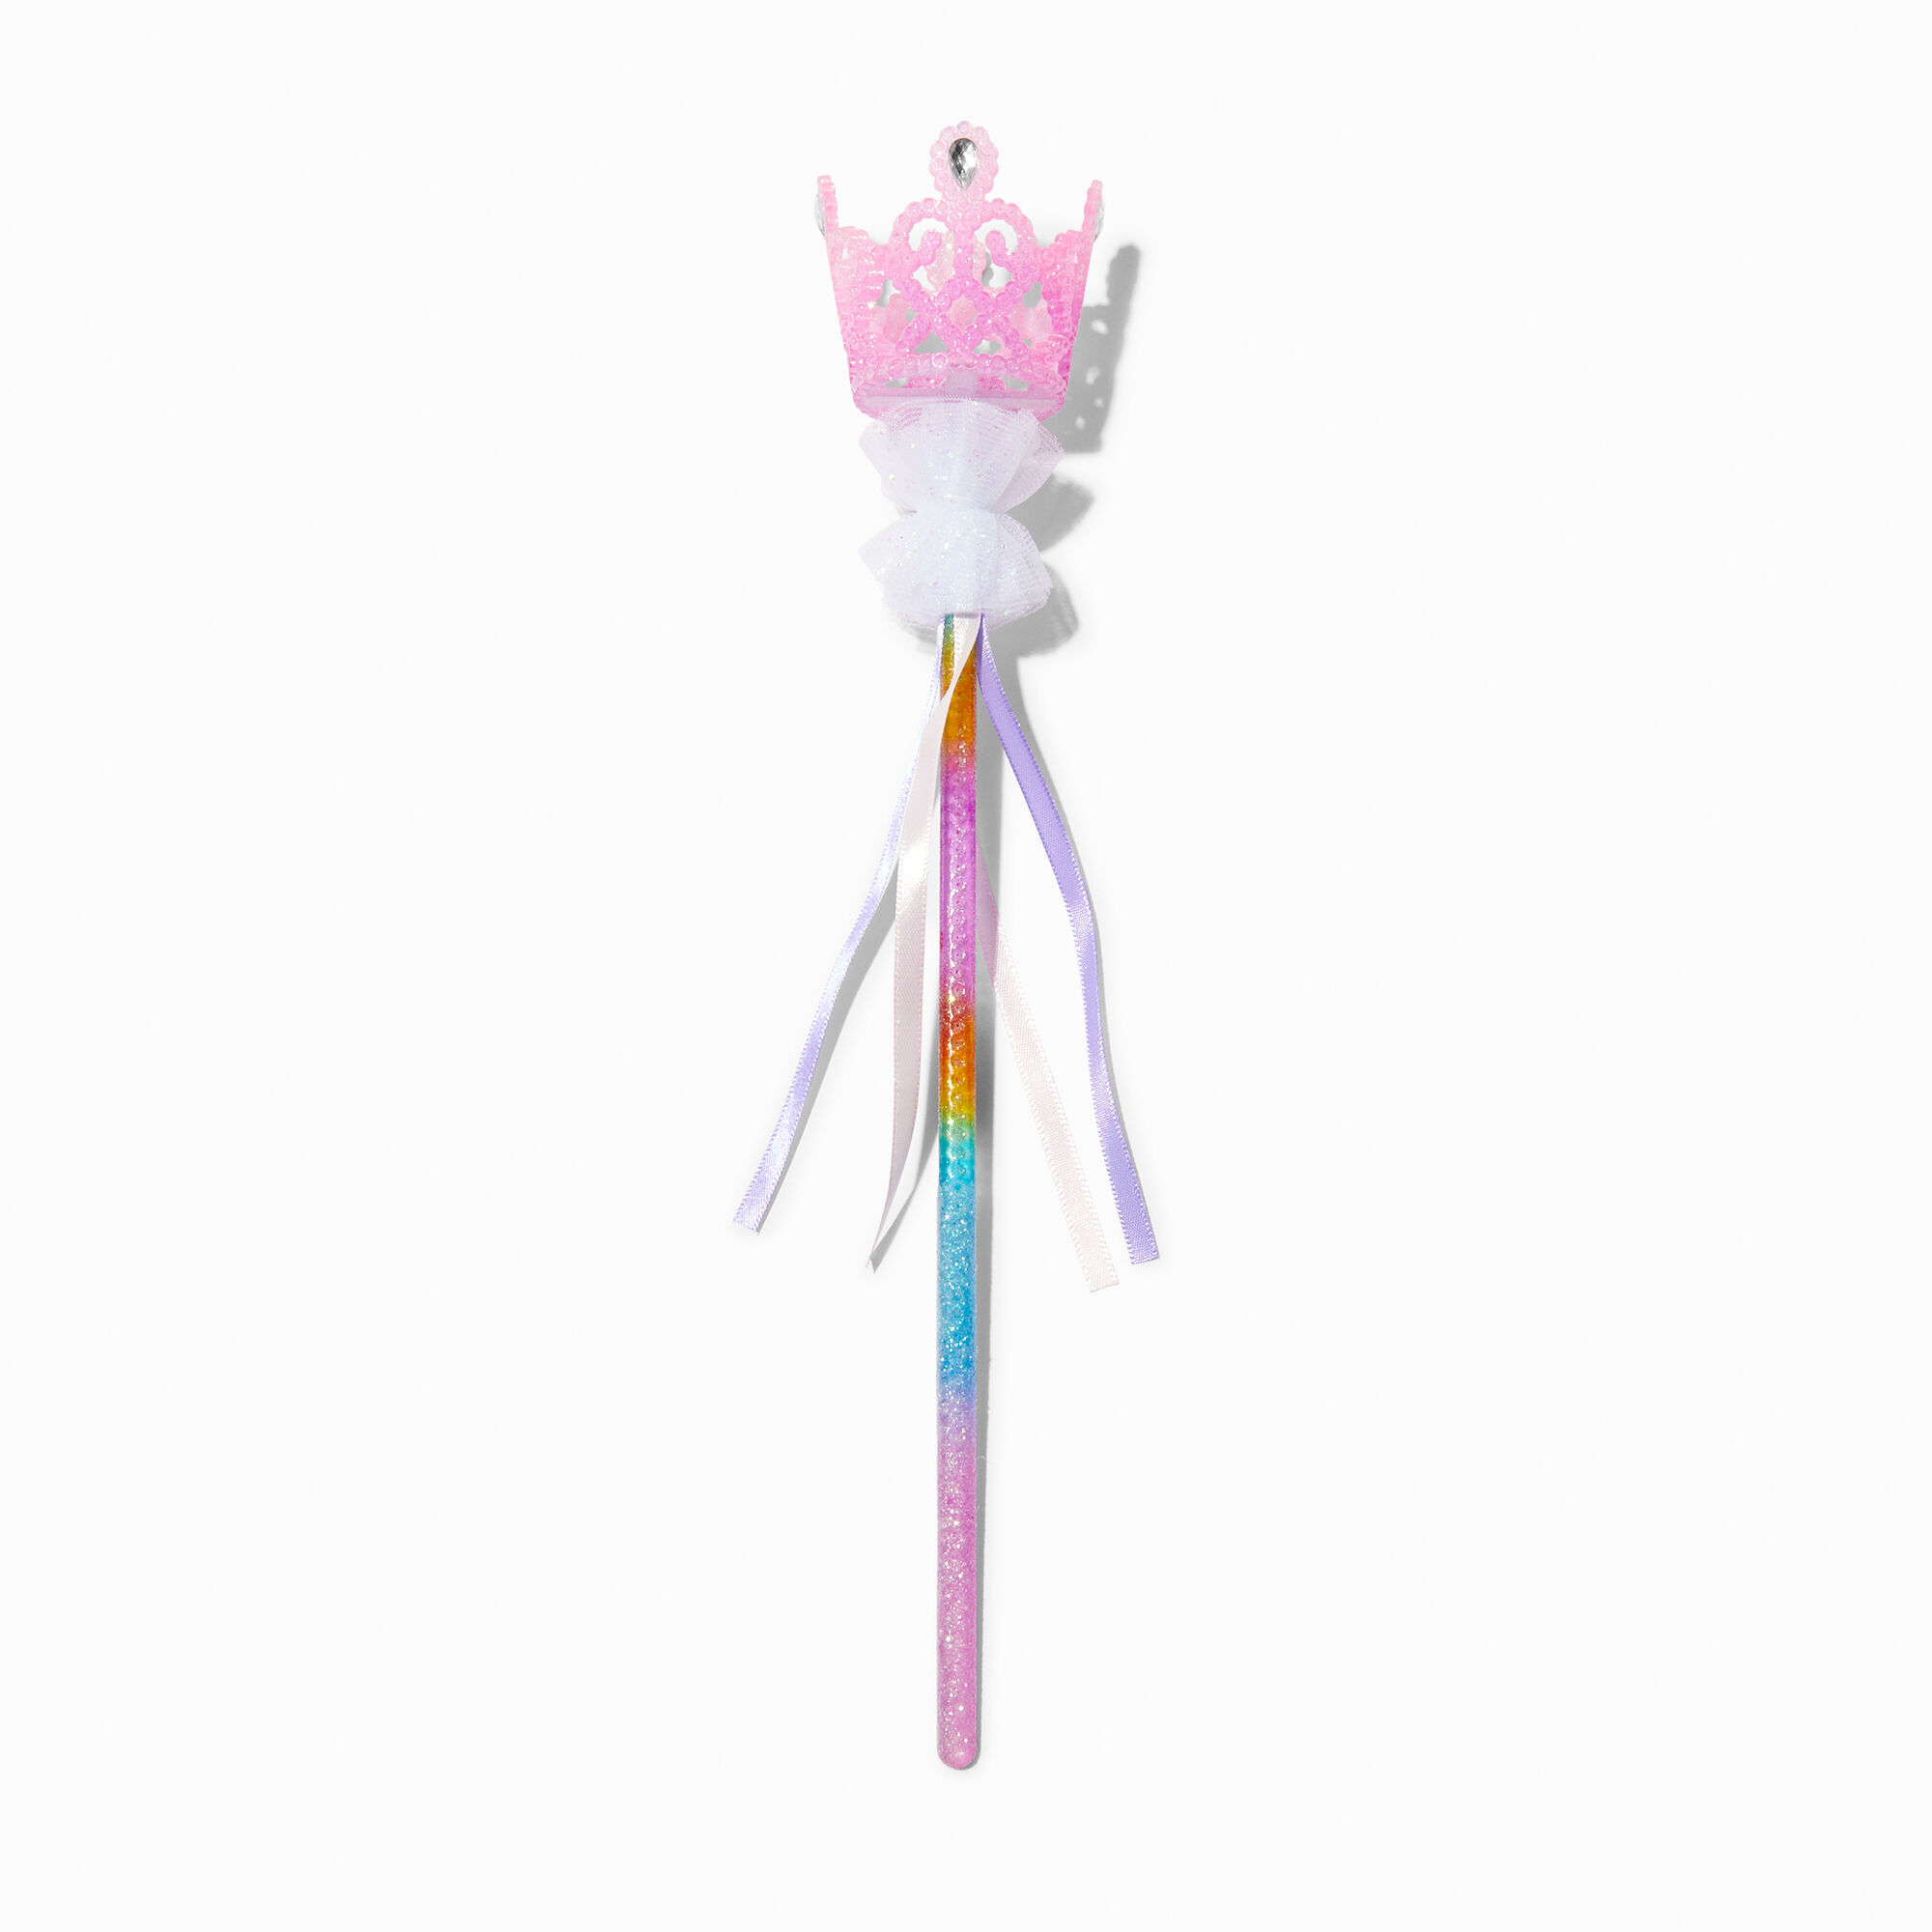 View Claires Club Pastel Crown Glitter Wand Pink information